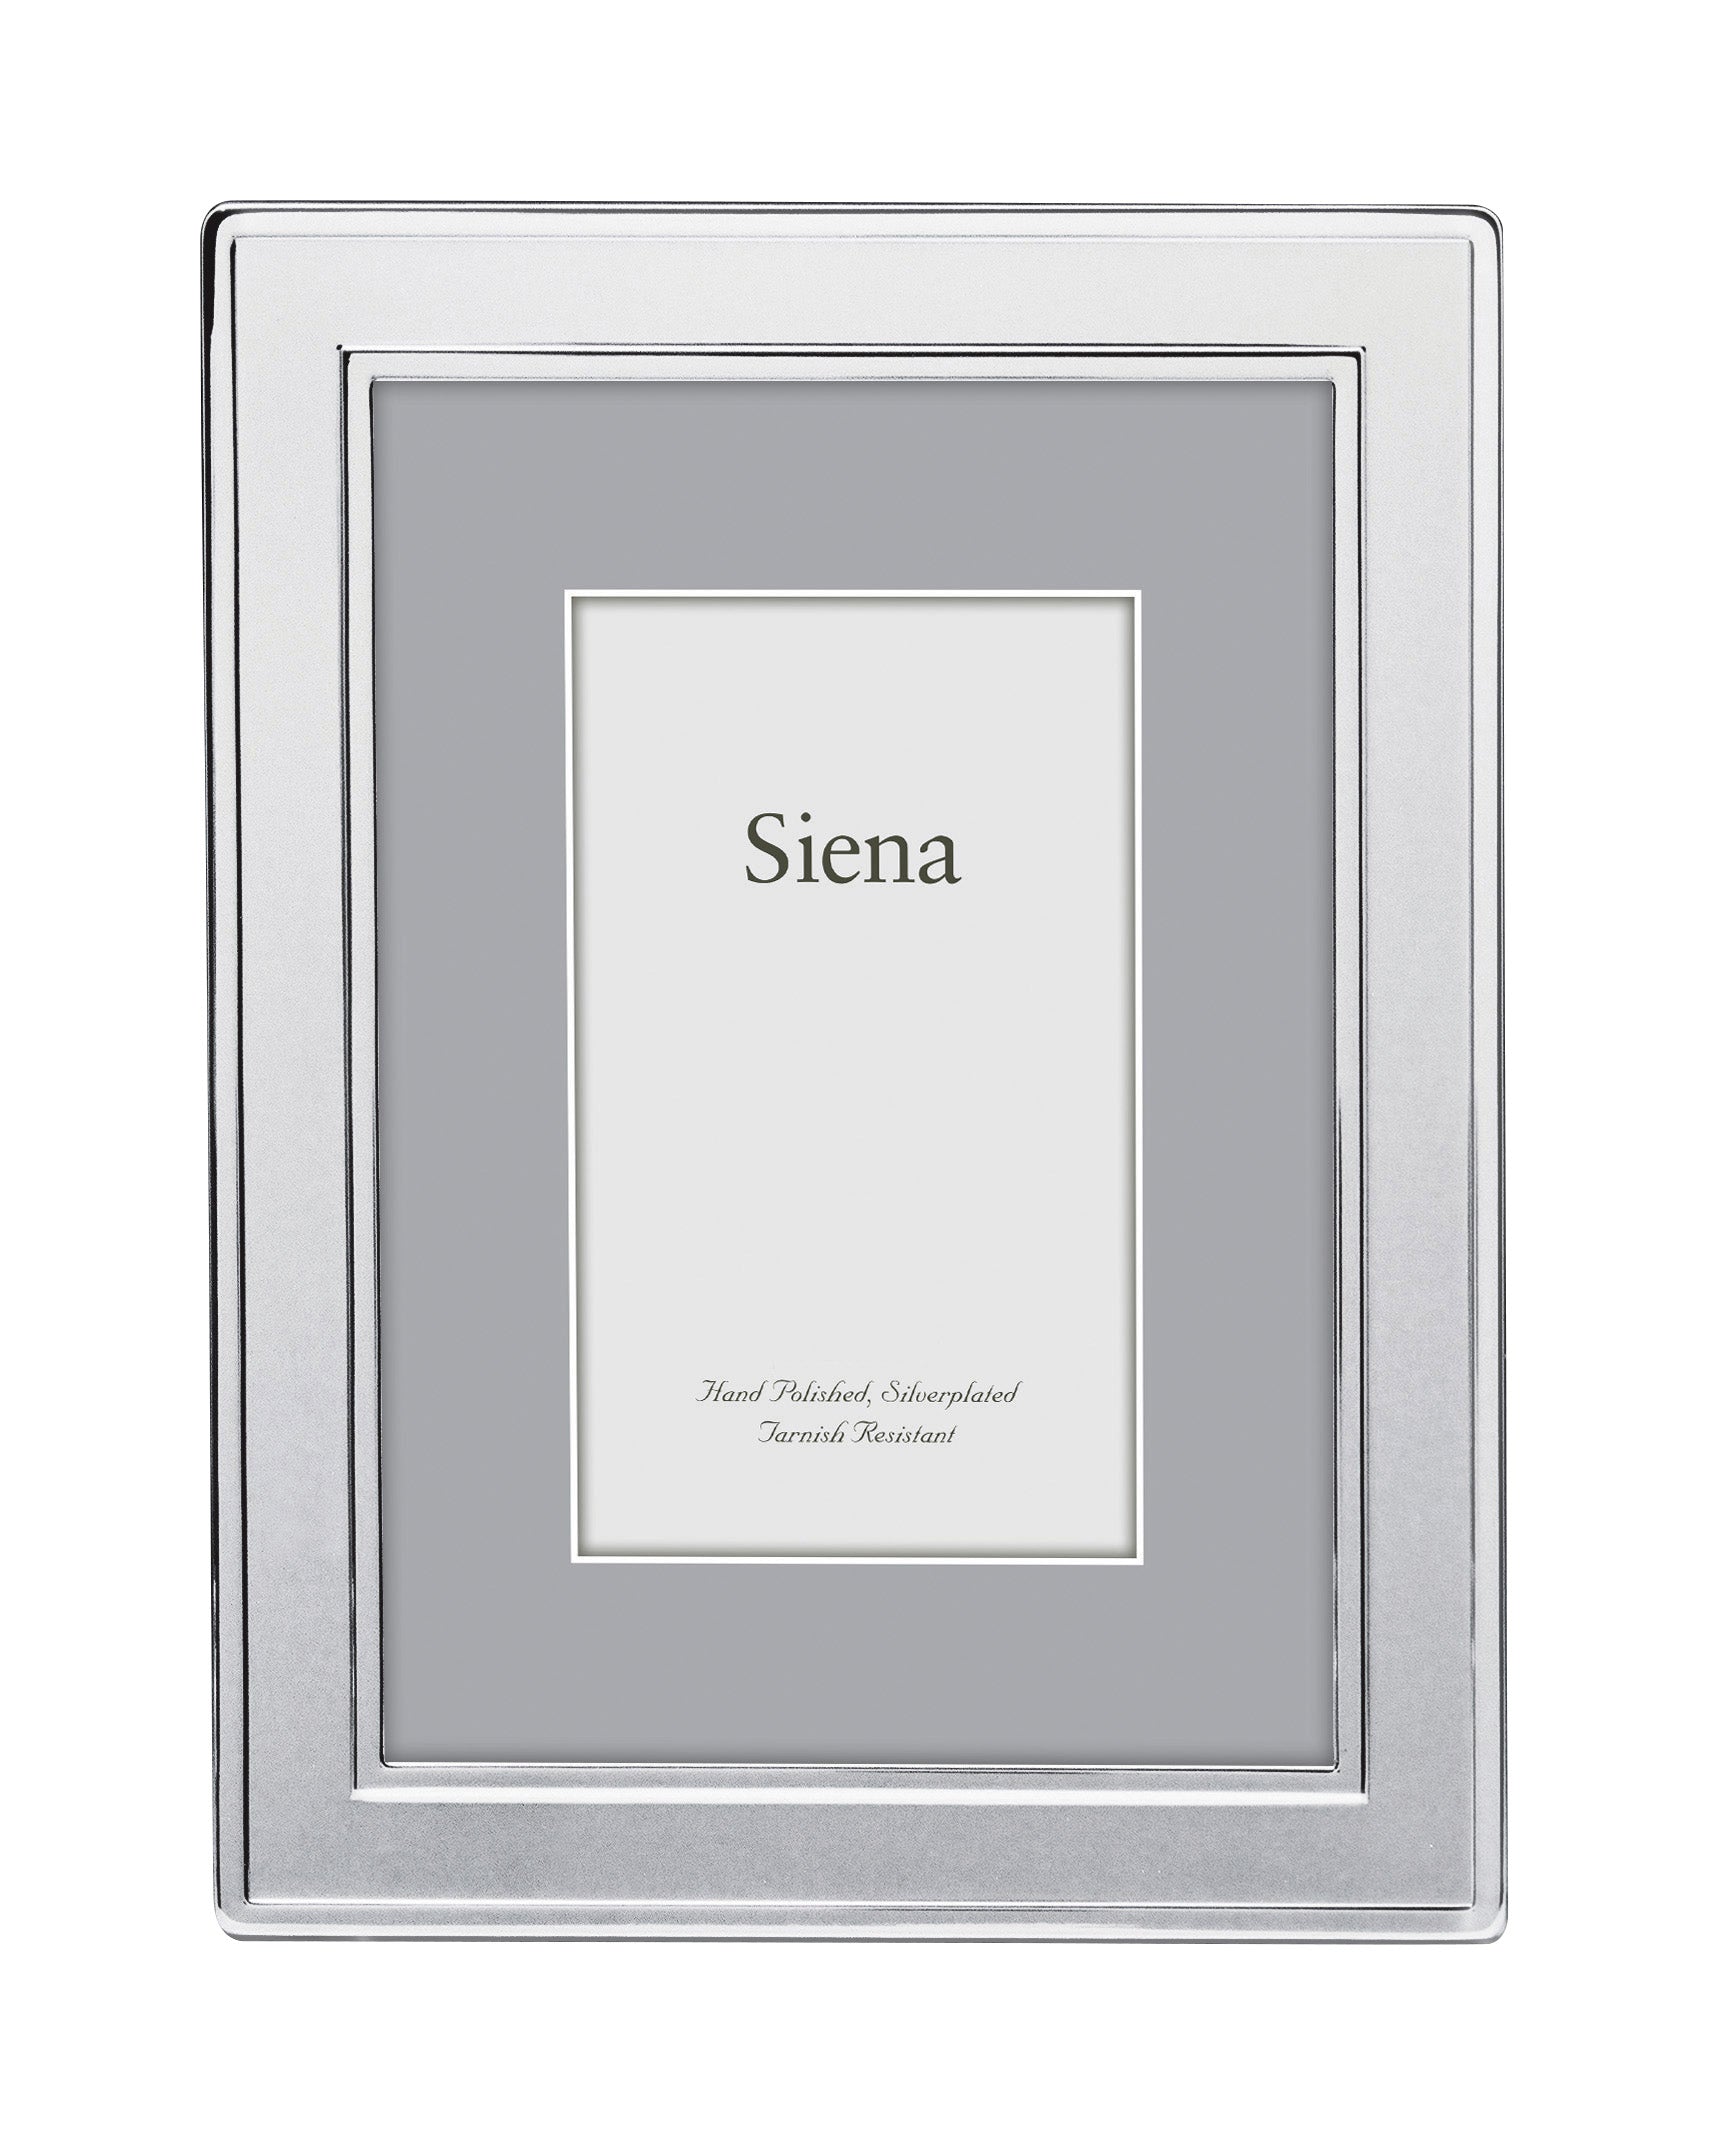 8 x 10 Silver-Plate Frame with Double Border